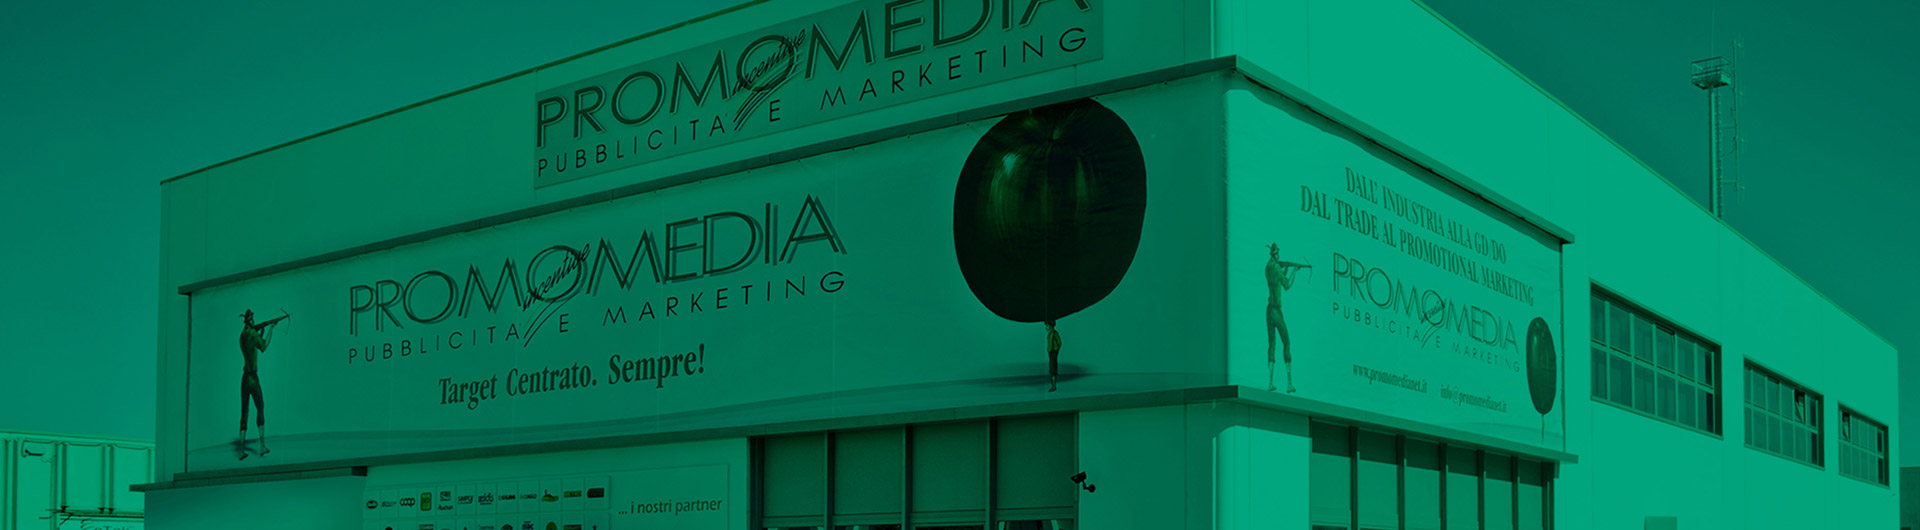 Promomedia Advertising and Marketing: external to the Bari office